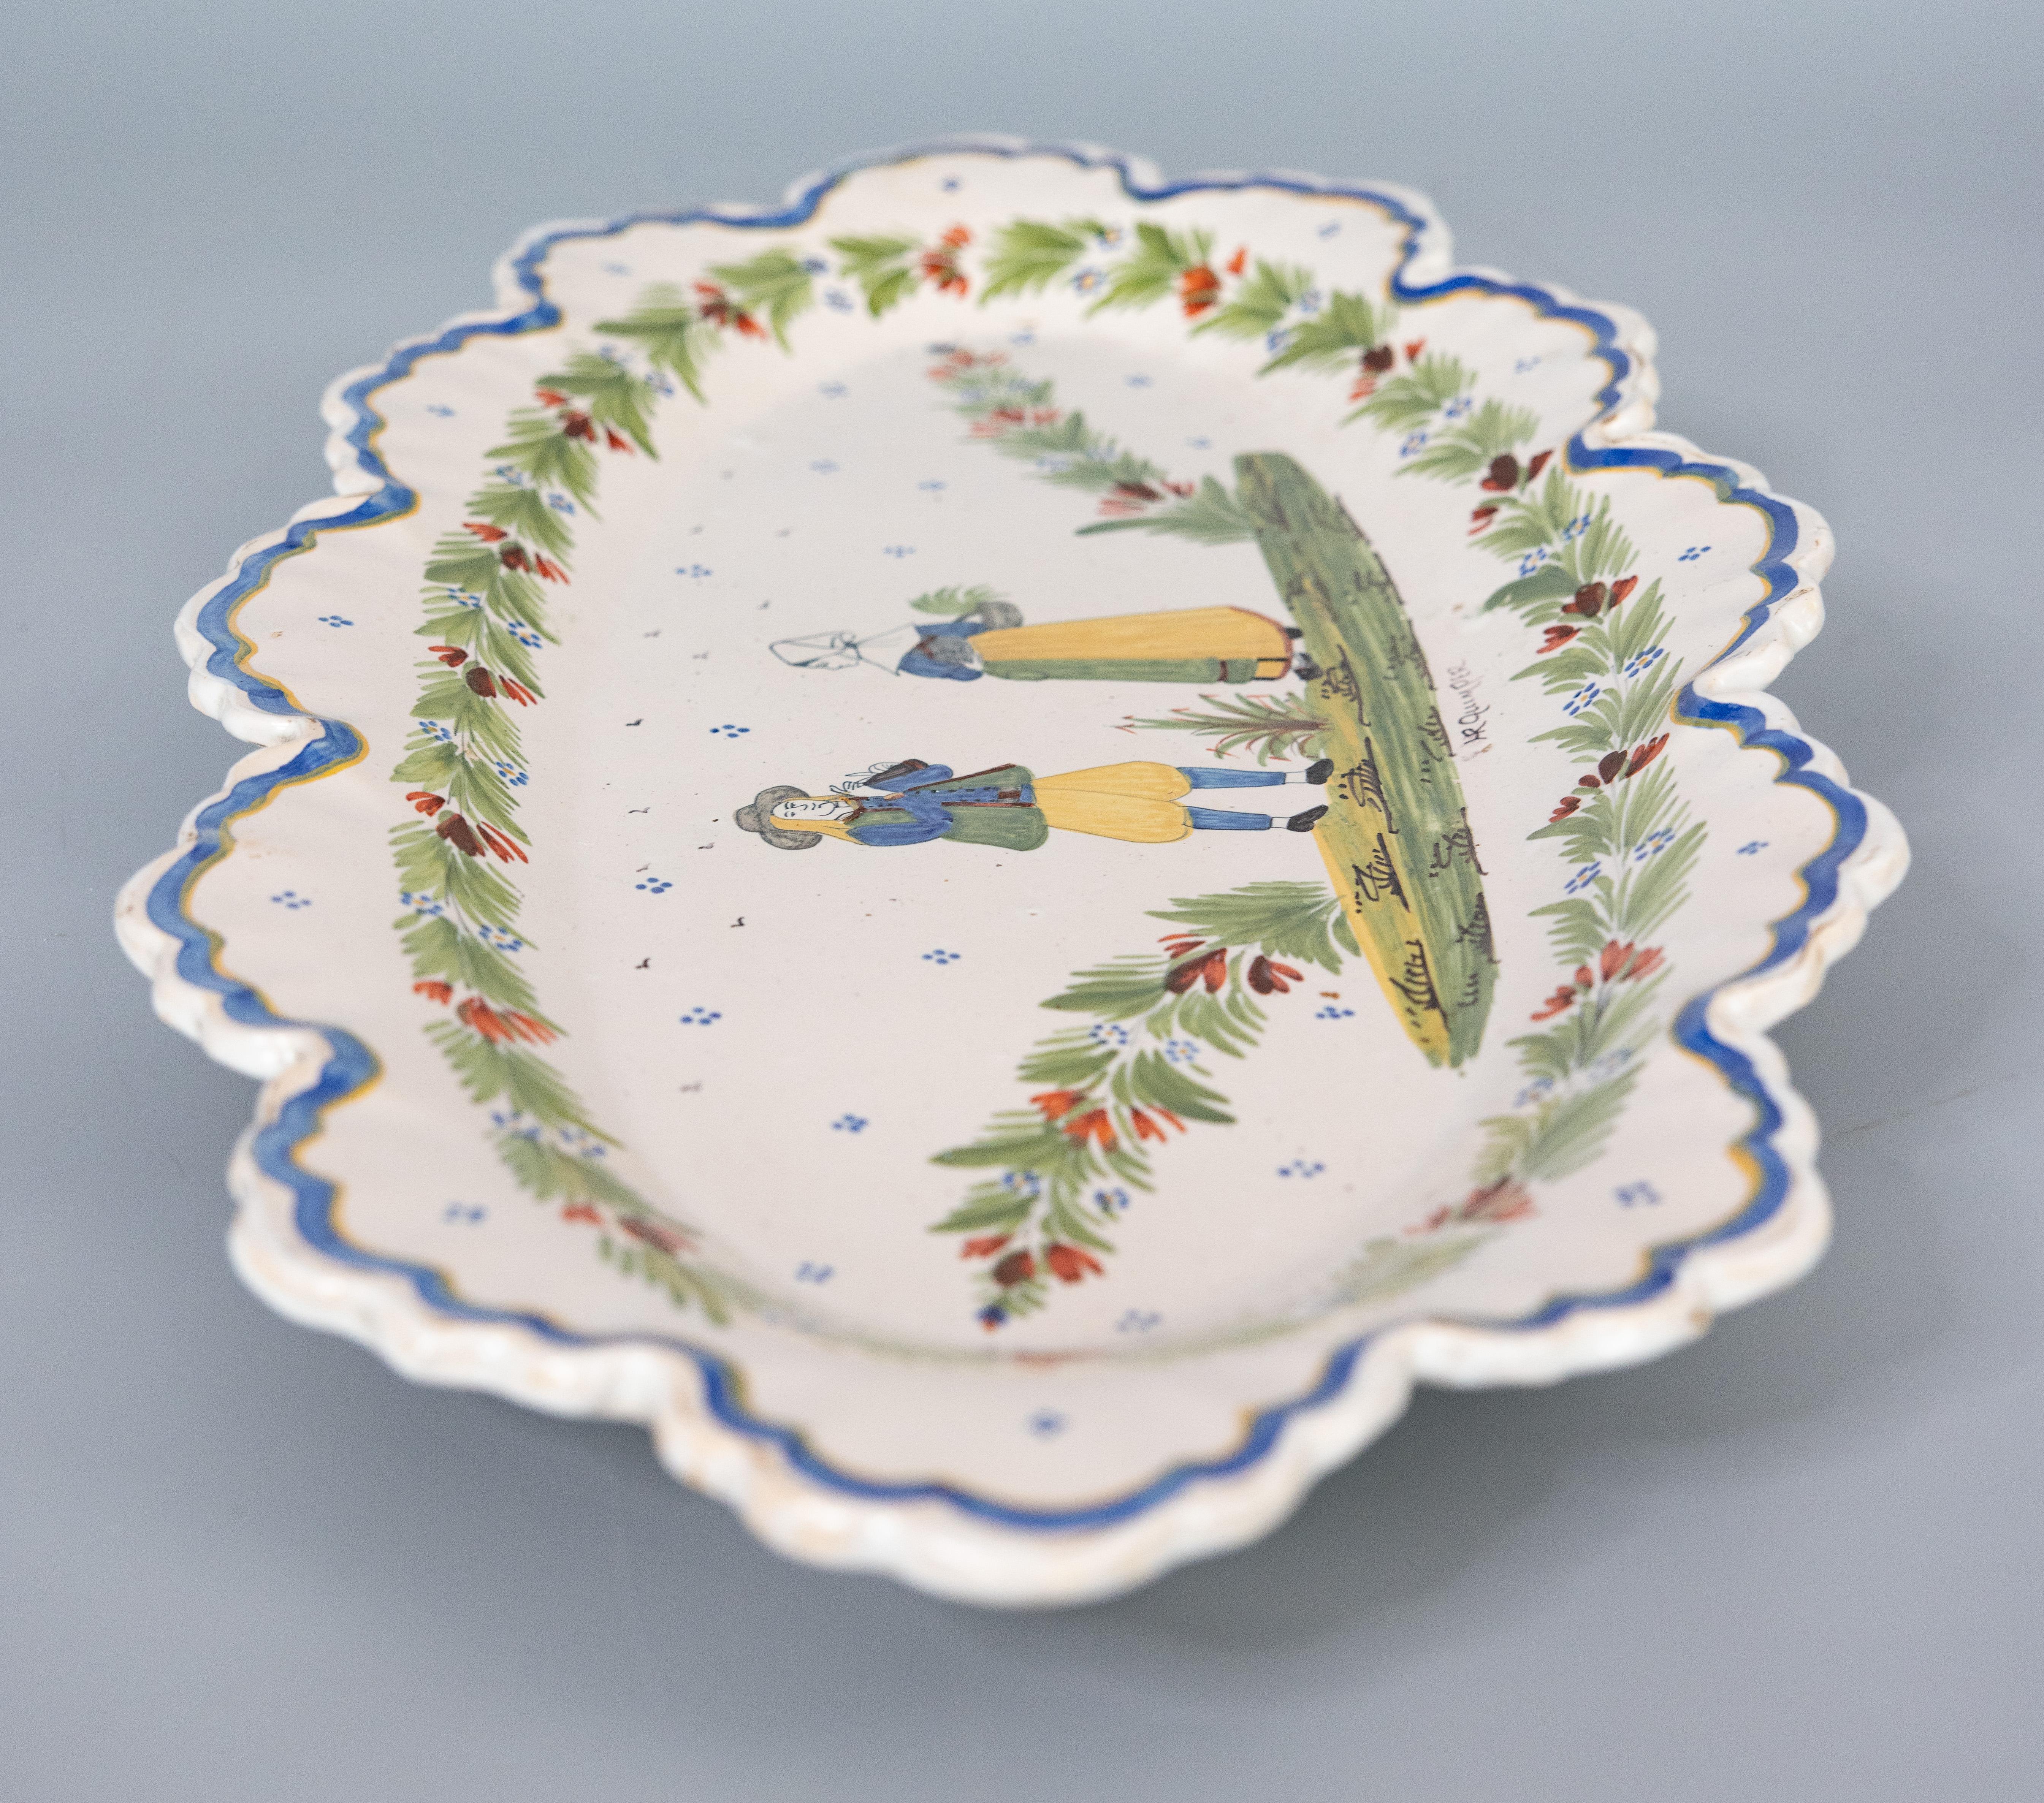 A superb large antique French provincial faience Quimper oval wall platter or charger, circa 1900. Marked 